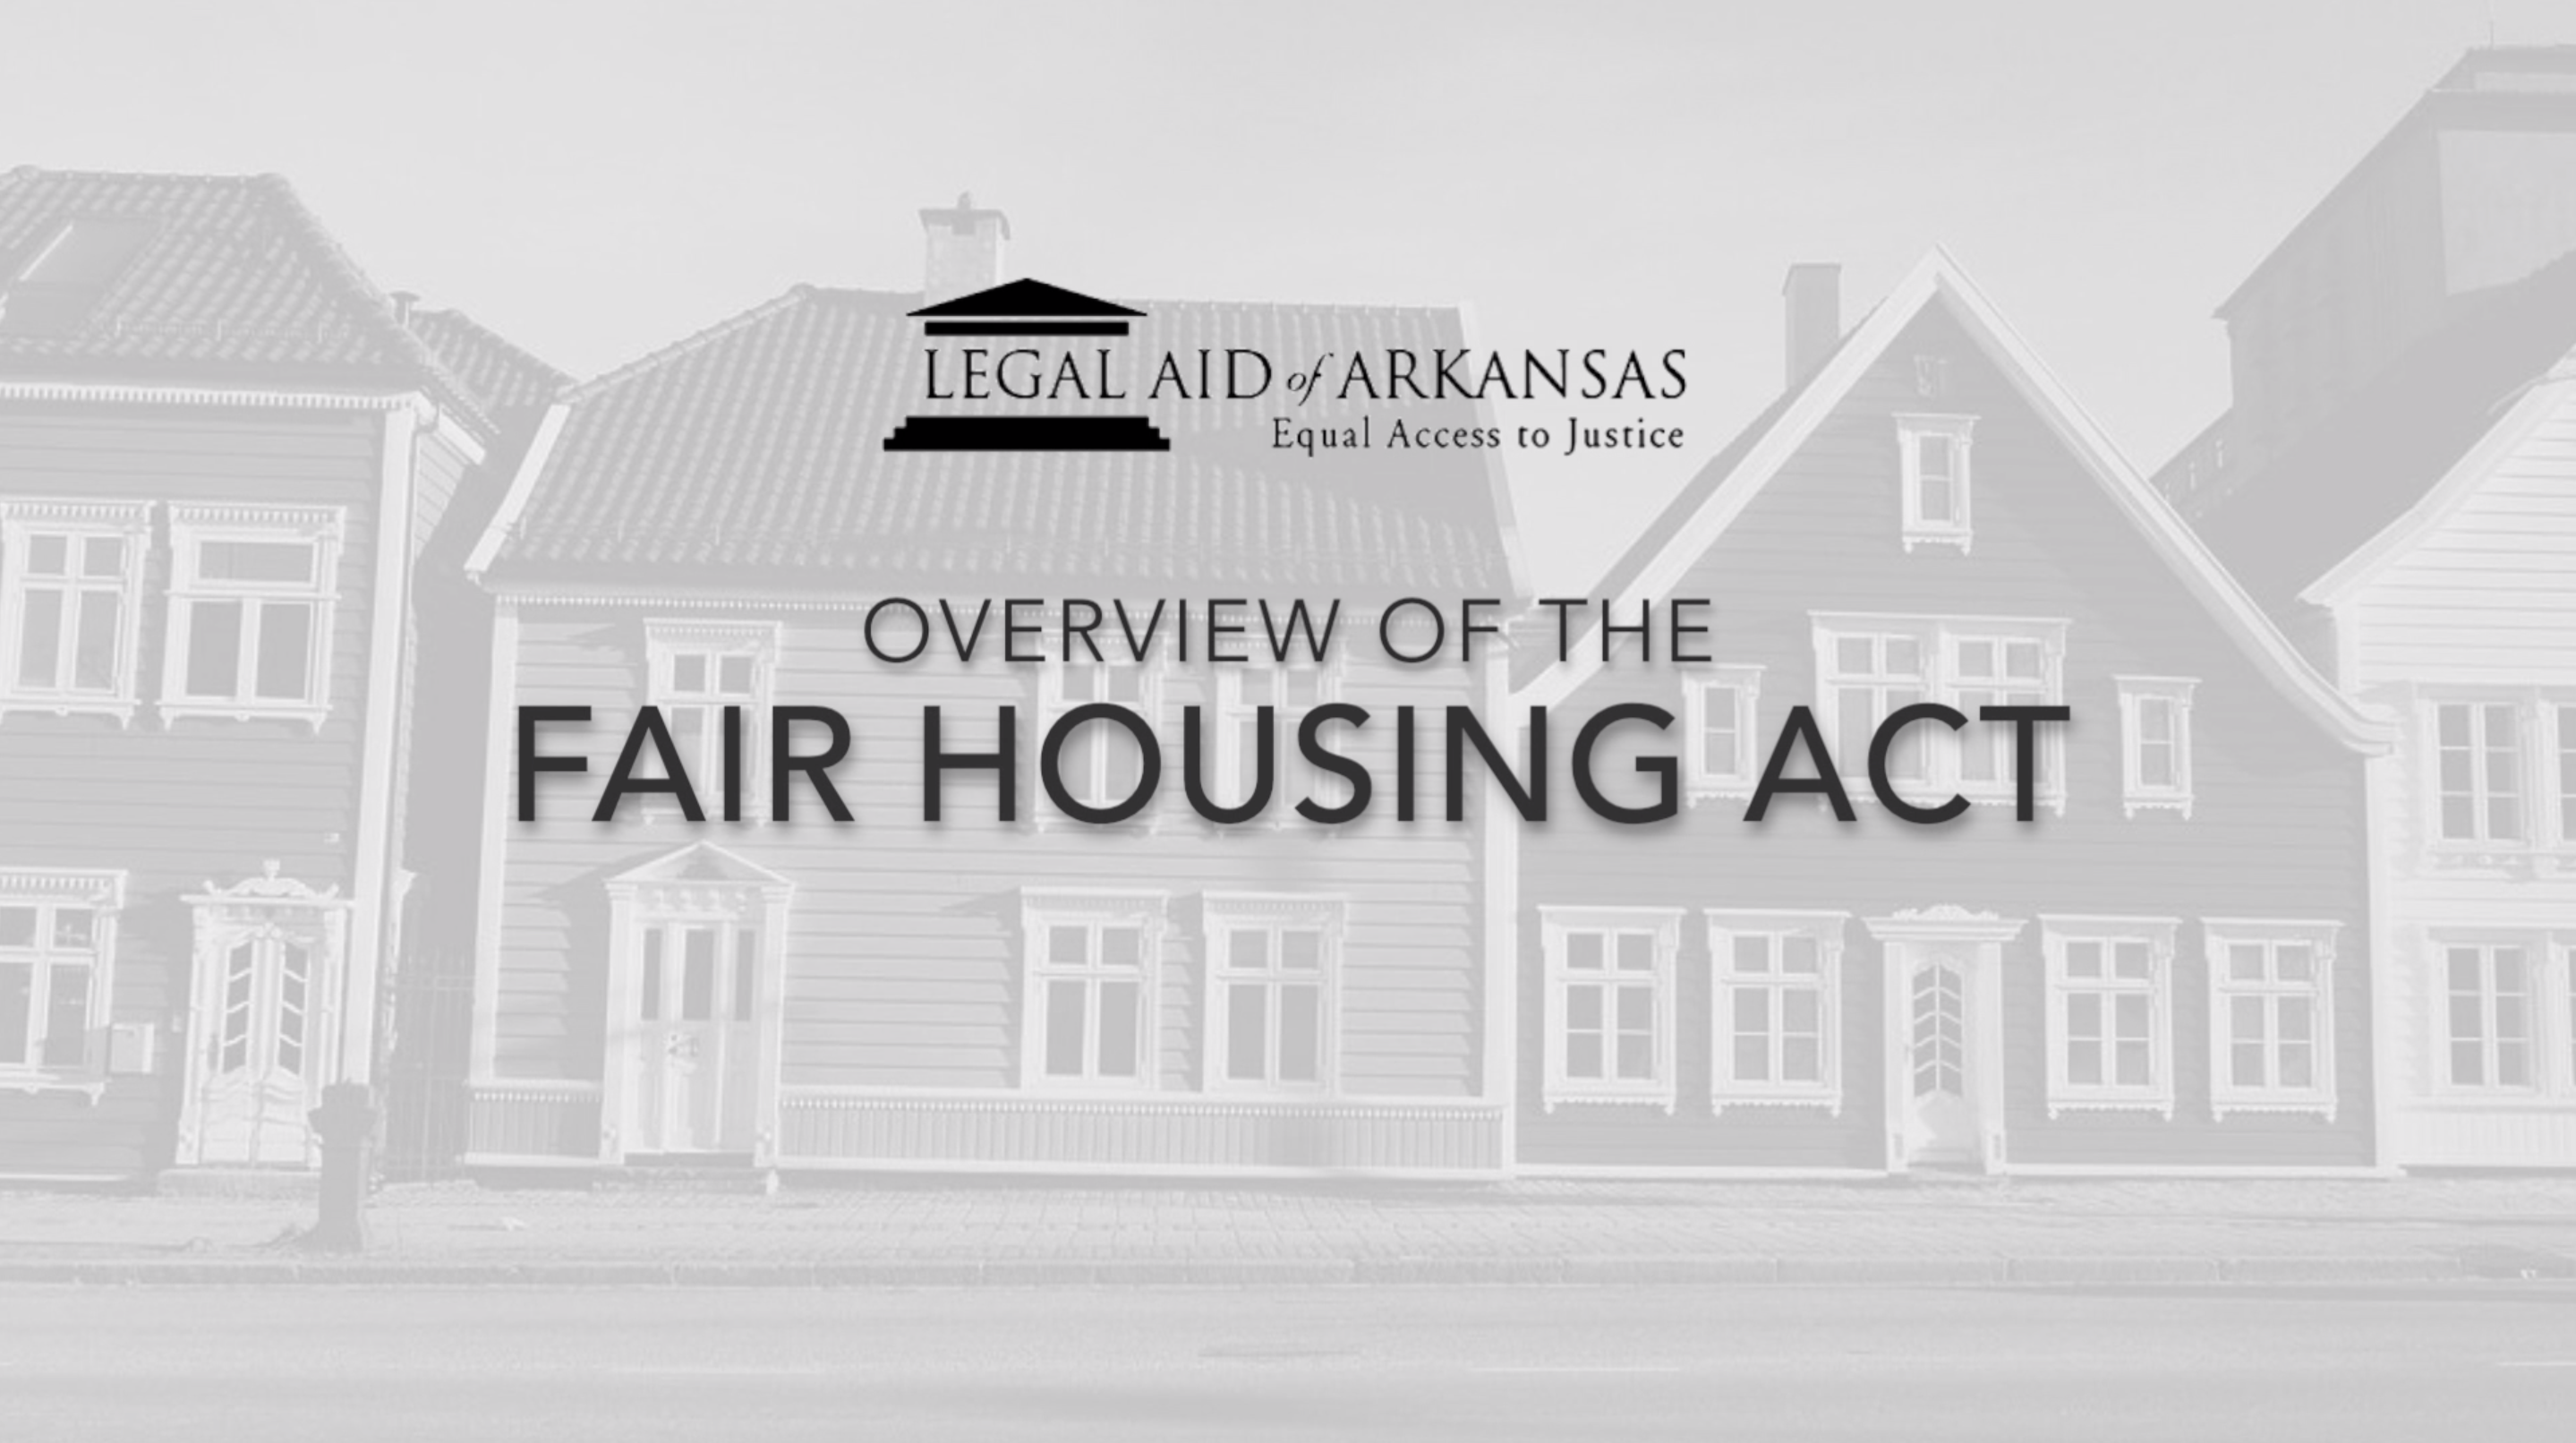 VIDEO - Overview of the Fair Housing Act